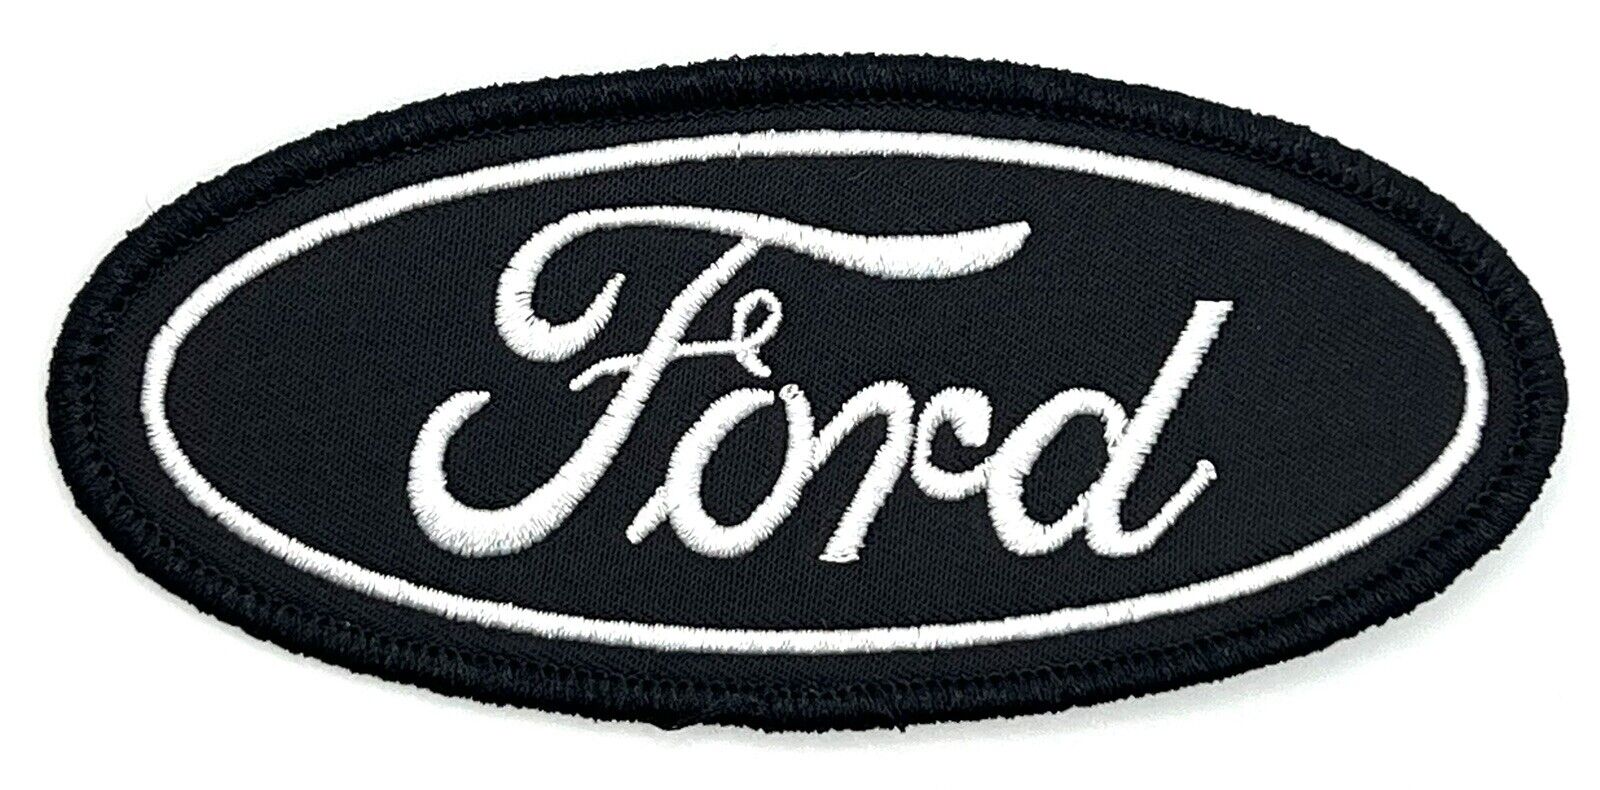 Ford Motorsports Truck Black Car Vintage Style Retro Patch Iron Cap Hat Racing